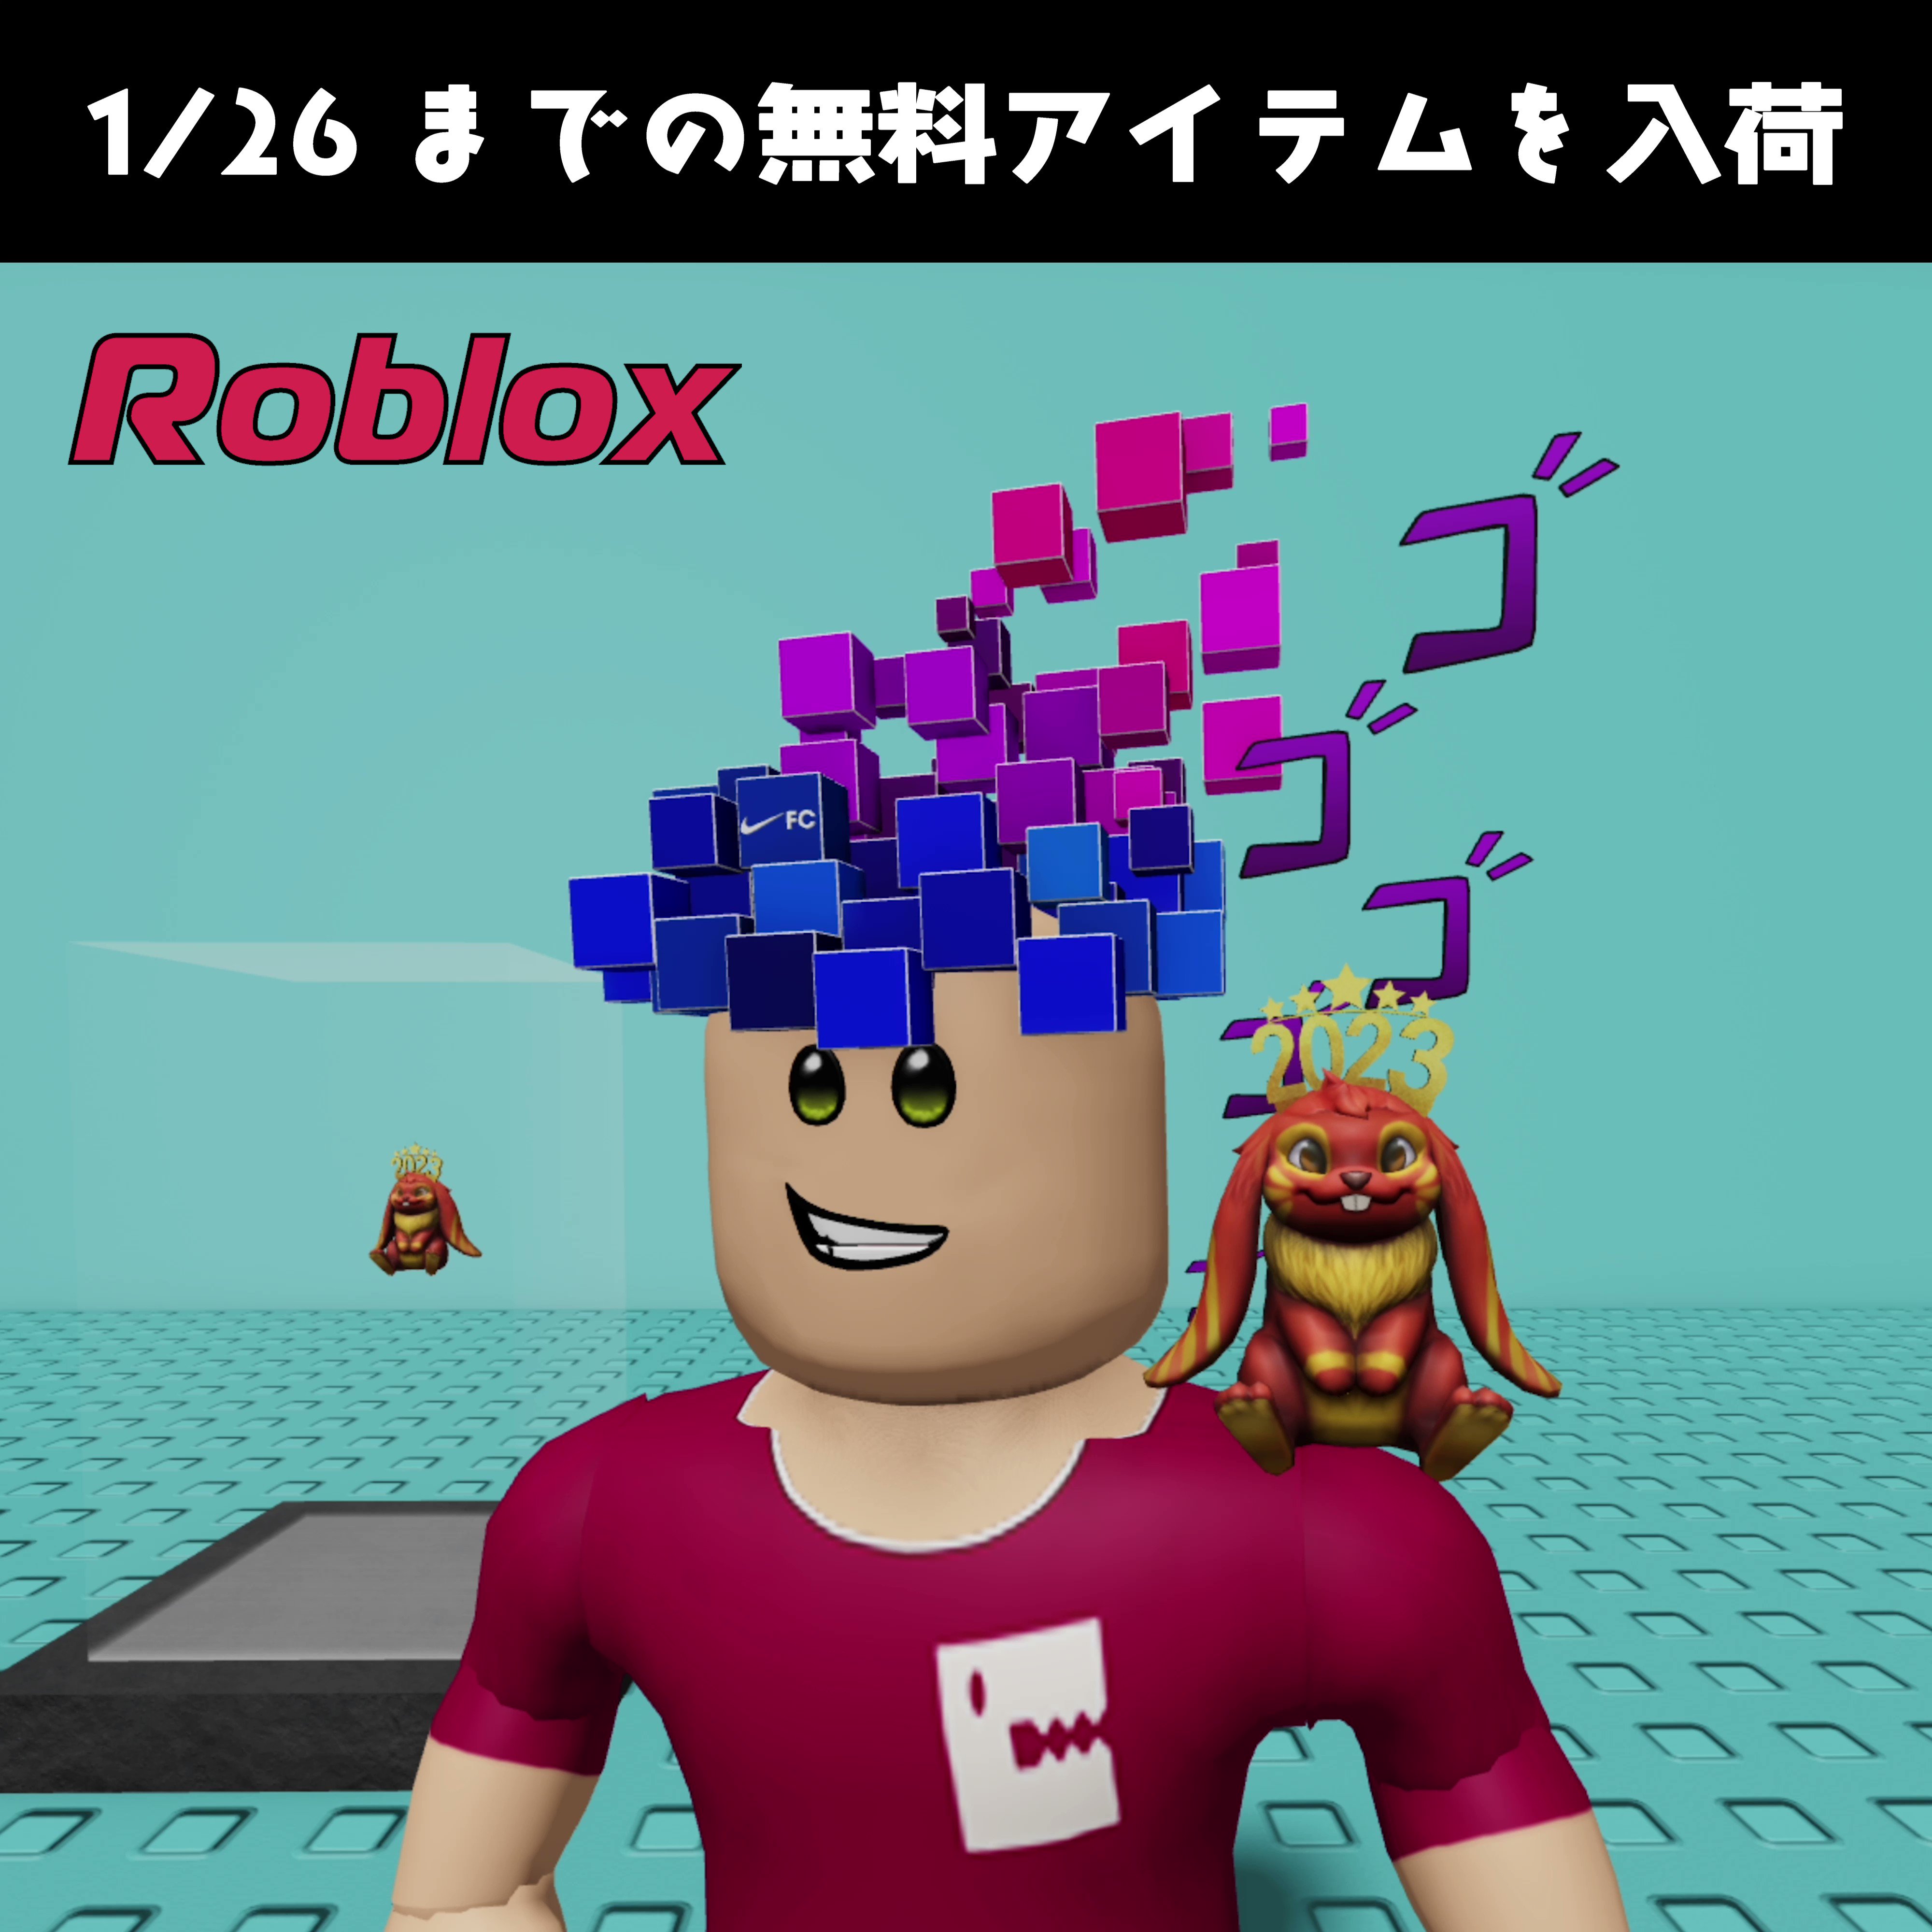 This game is Anime skin shop #roblox #robloxavatar #robloxmorph